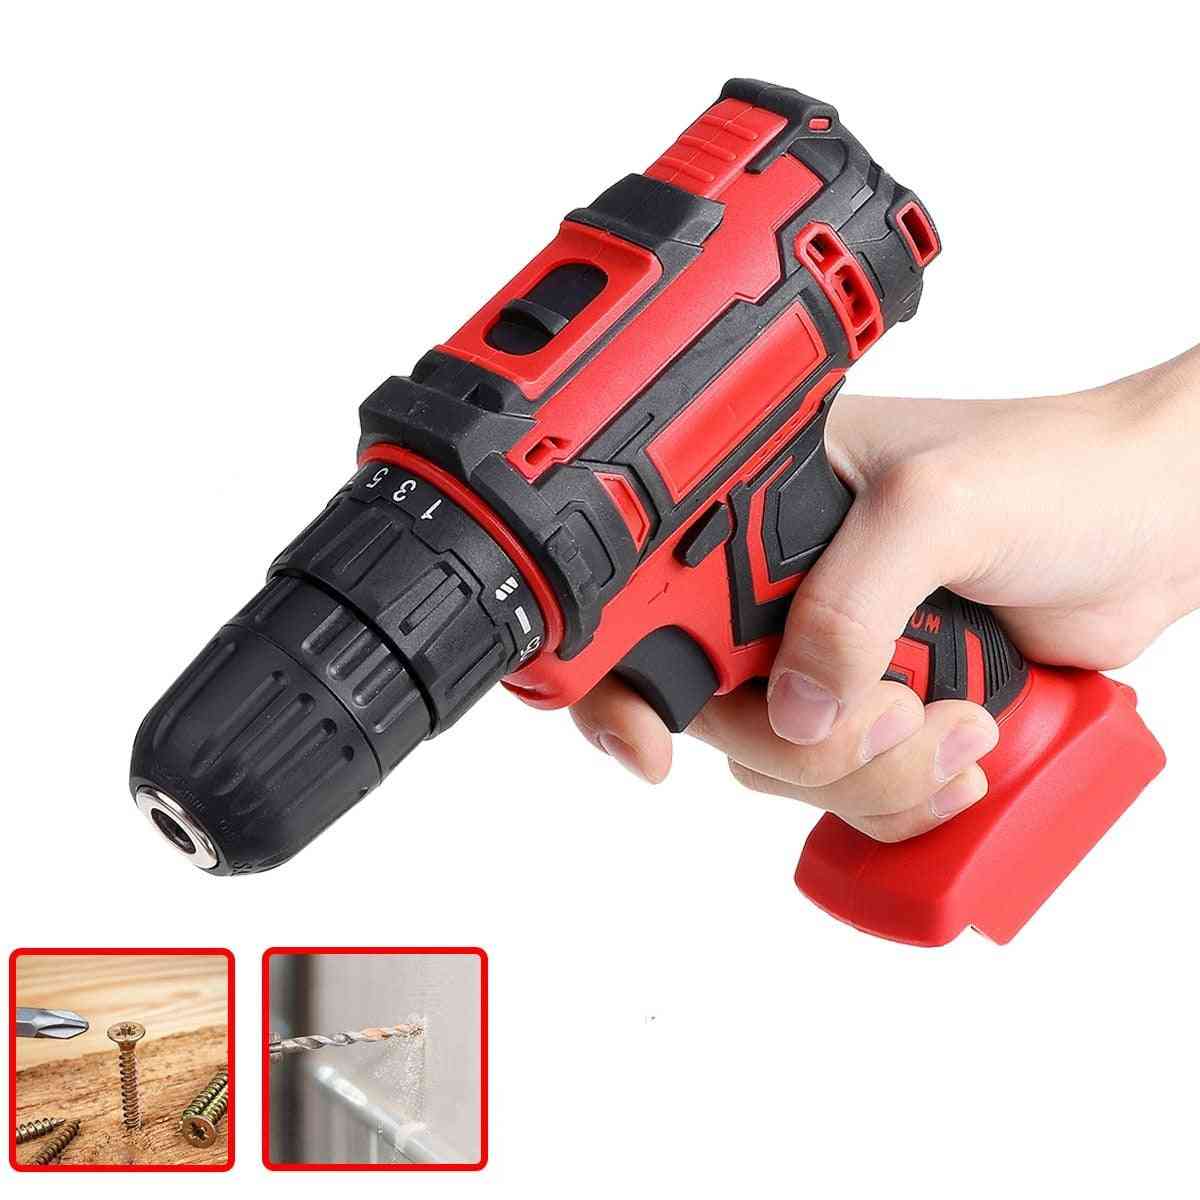 Cordless Electric Screwdriver, Hammer Drill